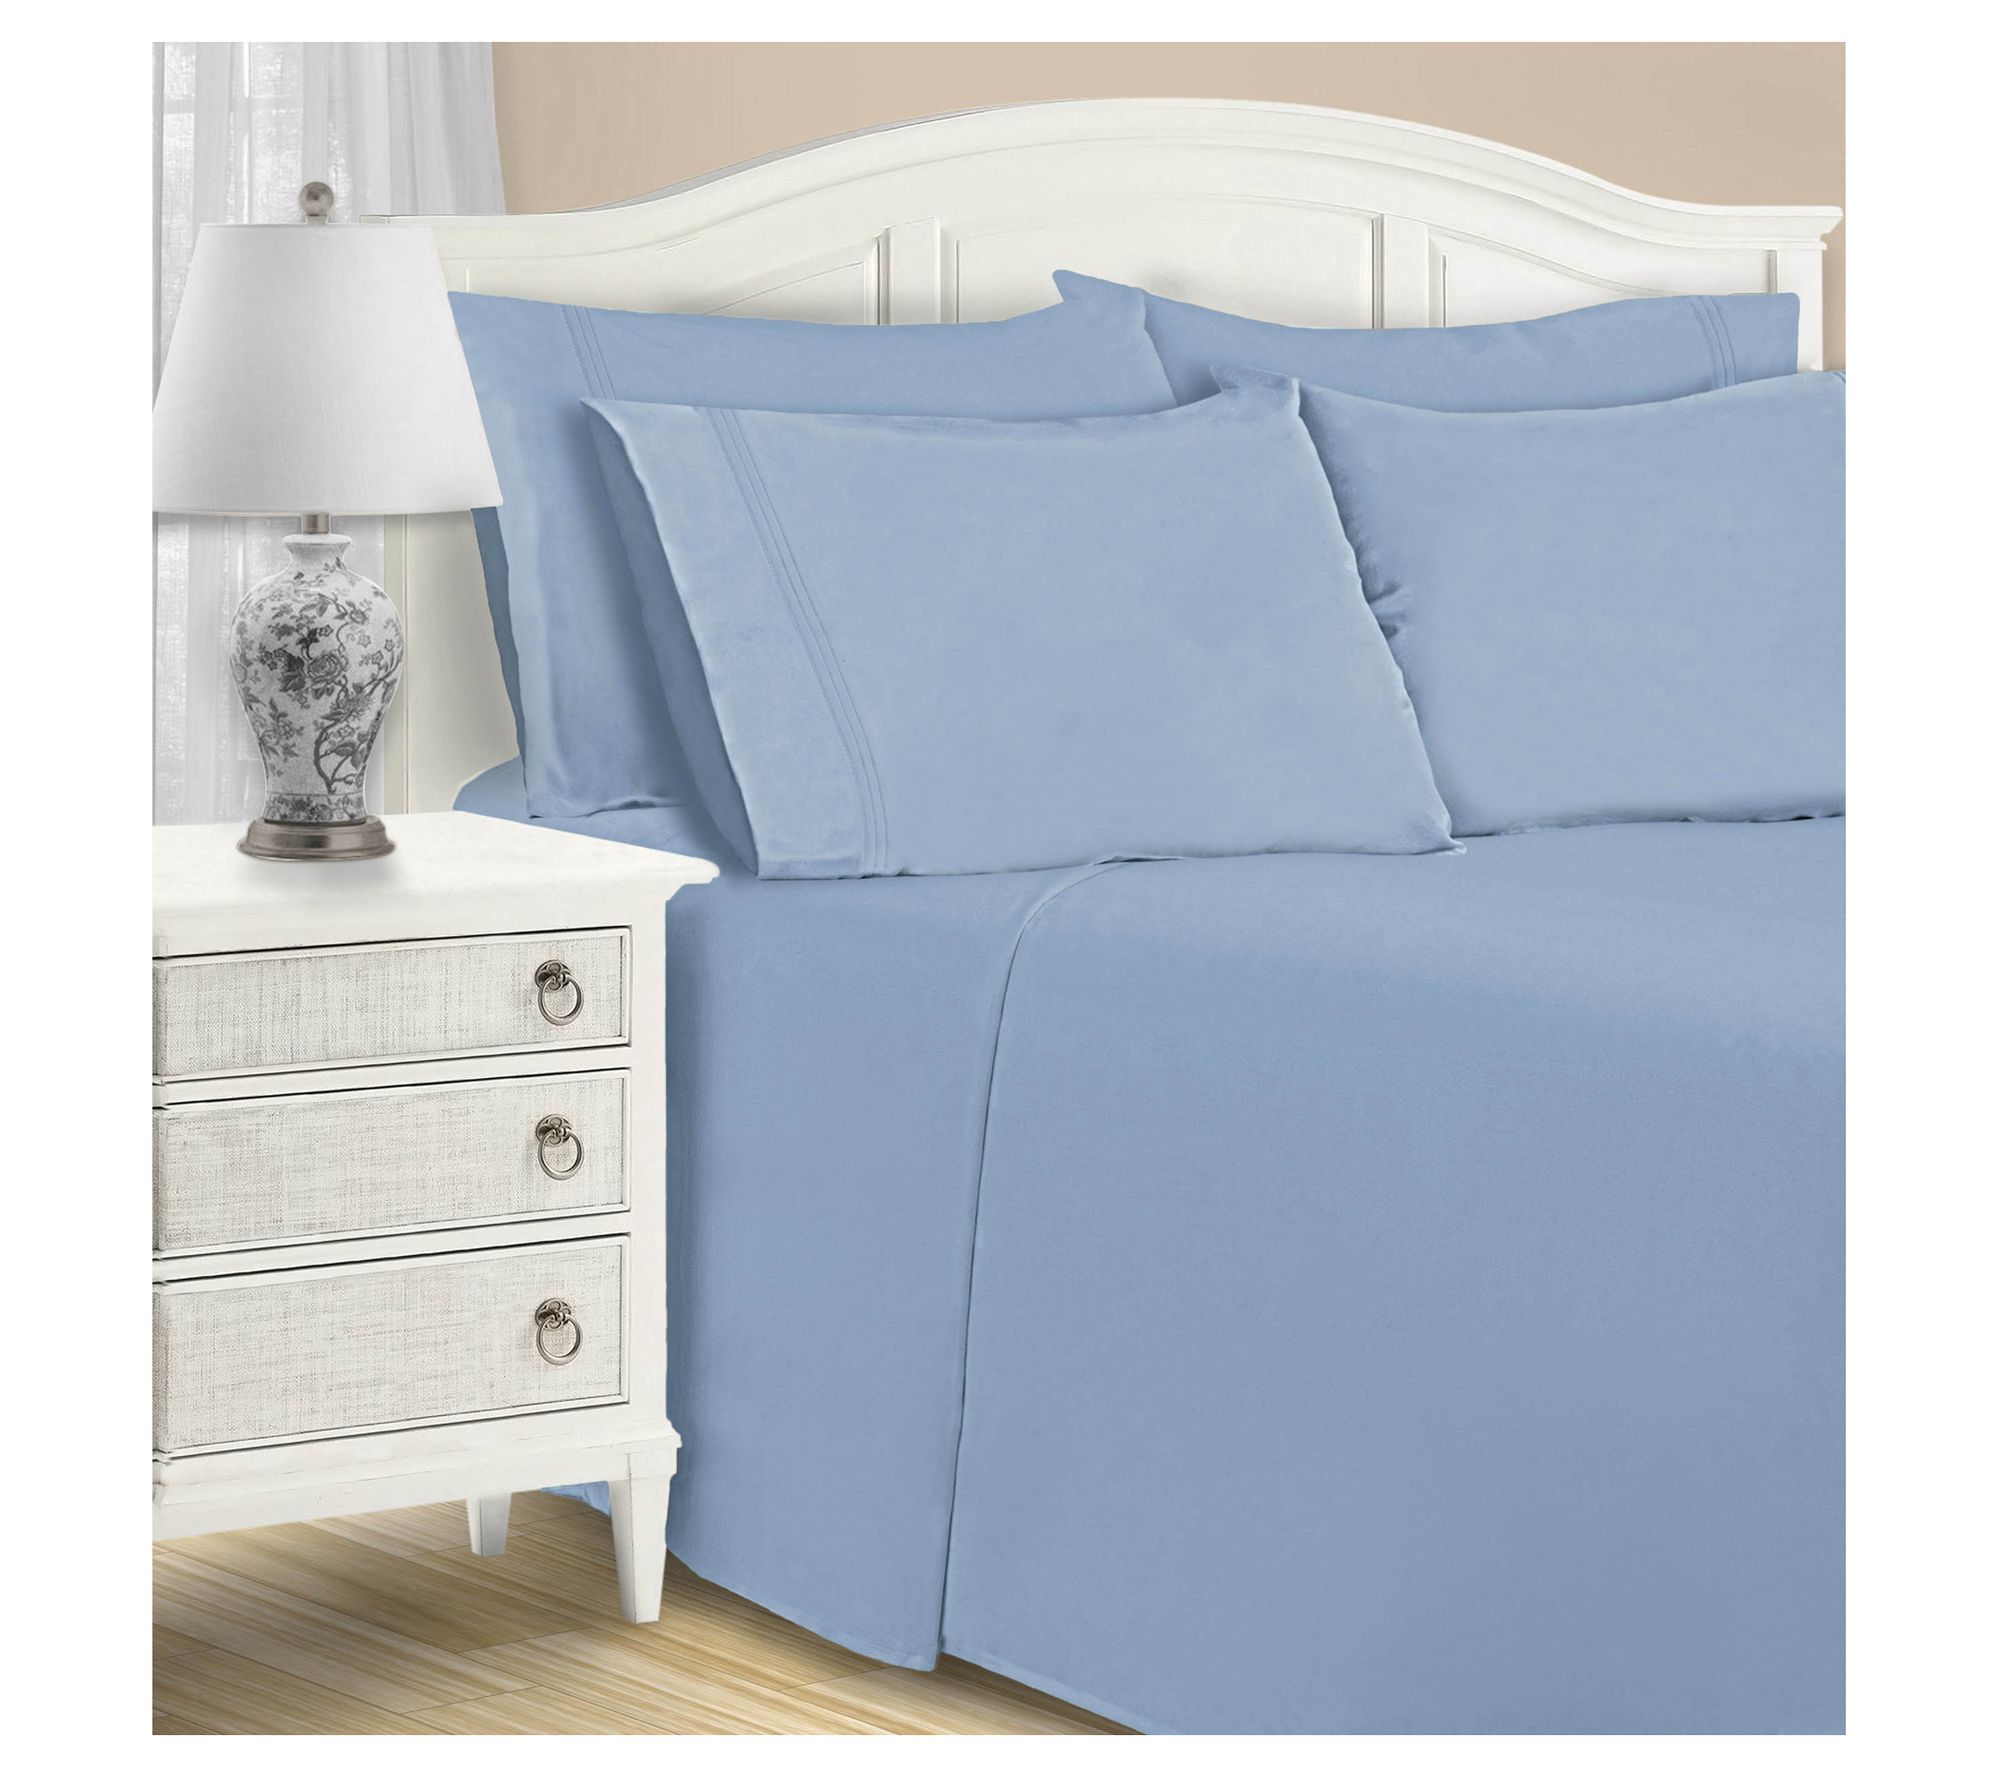 Queen White 6pc Microfiber Sheet Set By Bare Home : Target